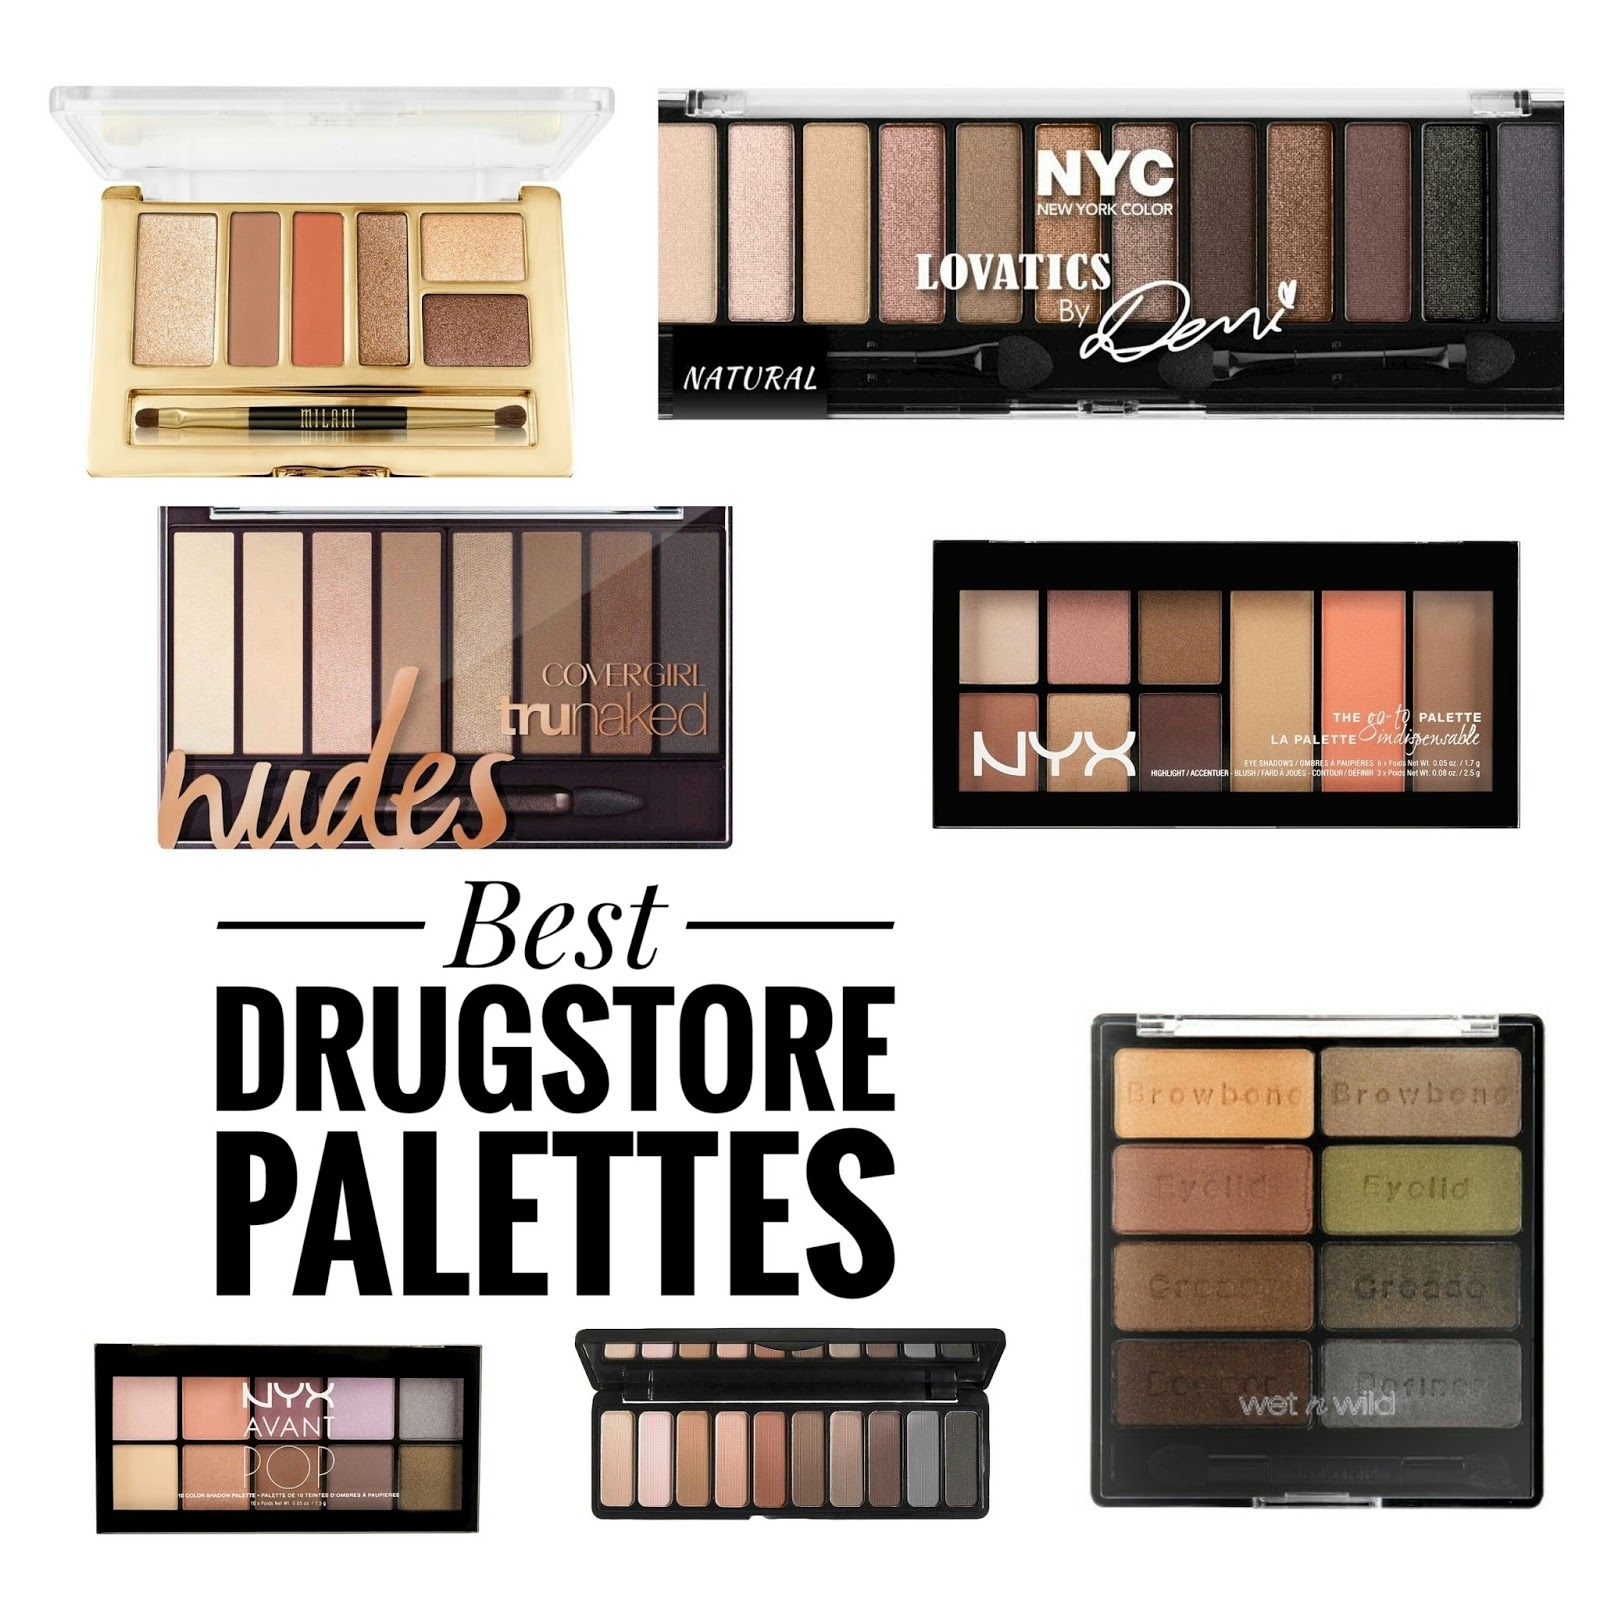 The Best Drugstore Eyeshadow Palettes | The Budget Beauty Blog within Best Drugstore Eyeshadow Palettes For Green Eyes